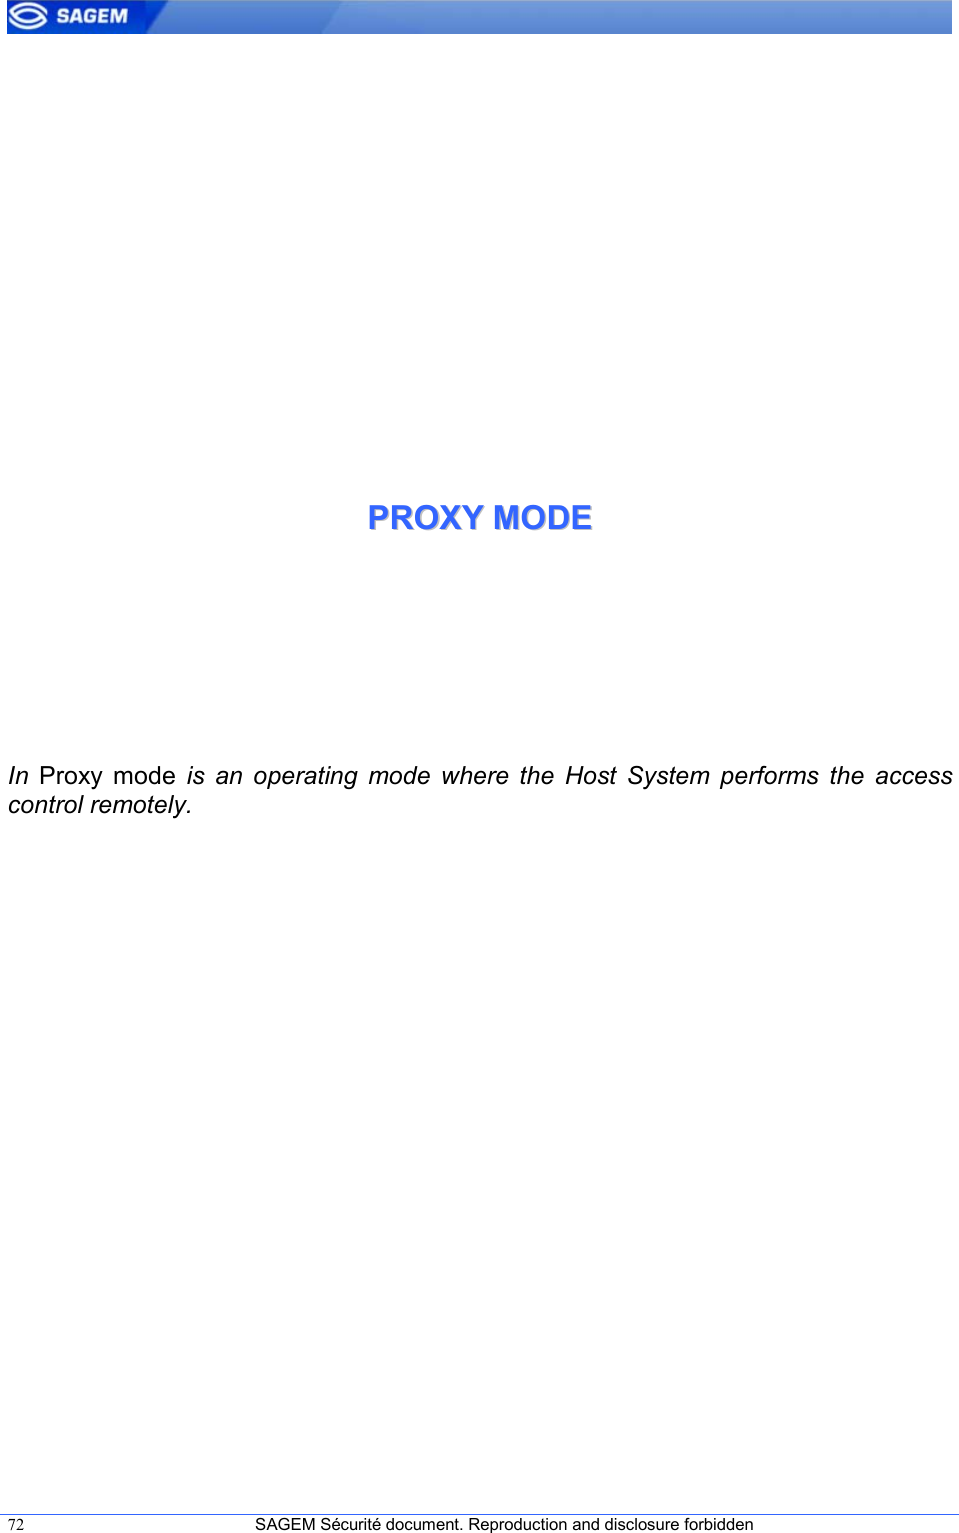  72  SAGEM Sécurité document. Reproduction and disclosure forbidden   PPRROOXXYY  MMOODDEE  In  Proxy  mode  is  an  operating  mode  where  the  Host  System  performs  the  access control remotely. 